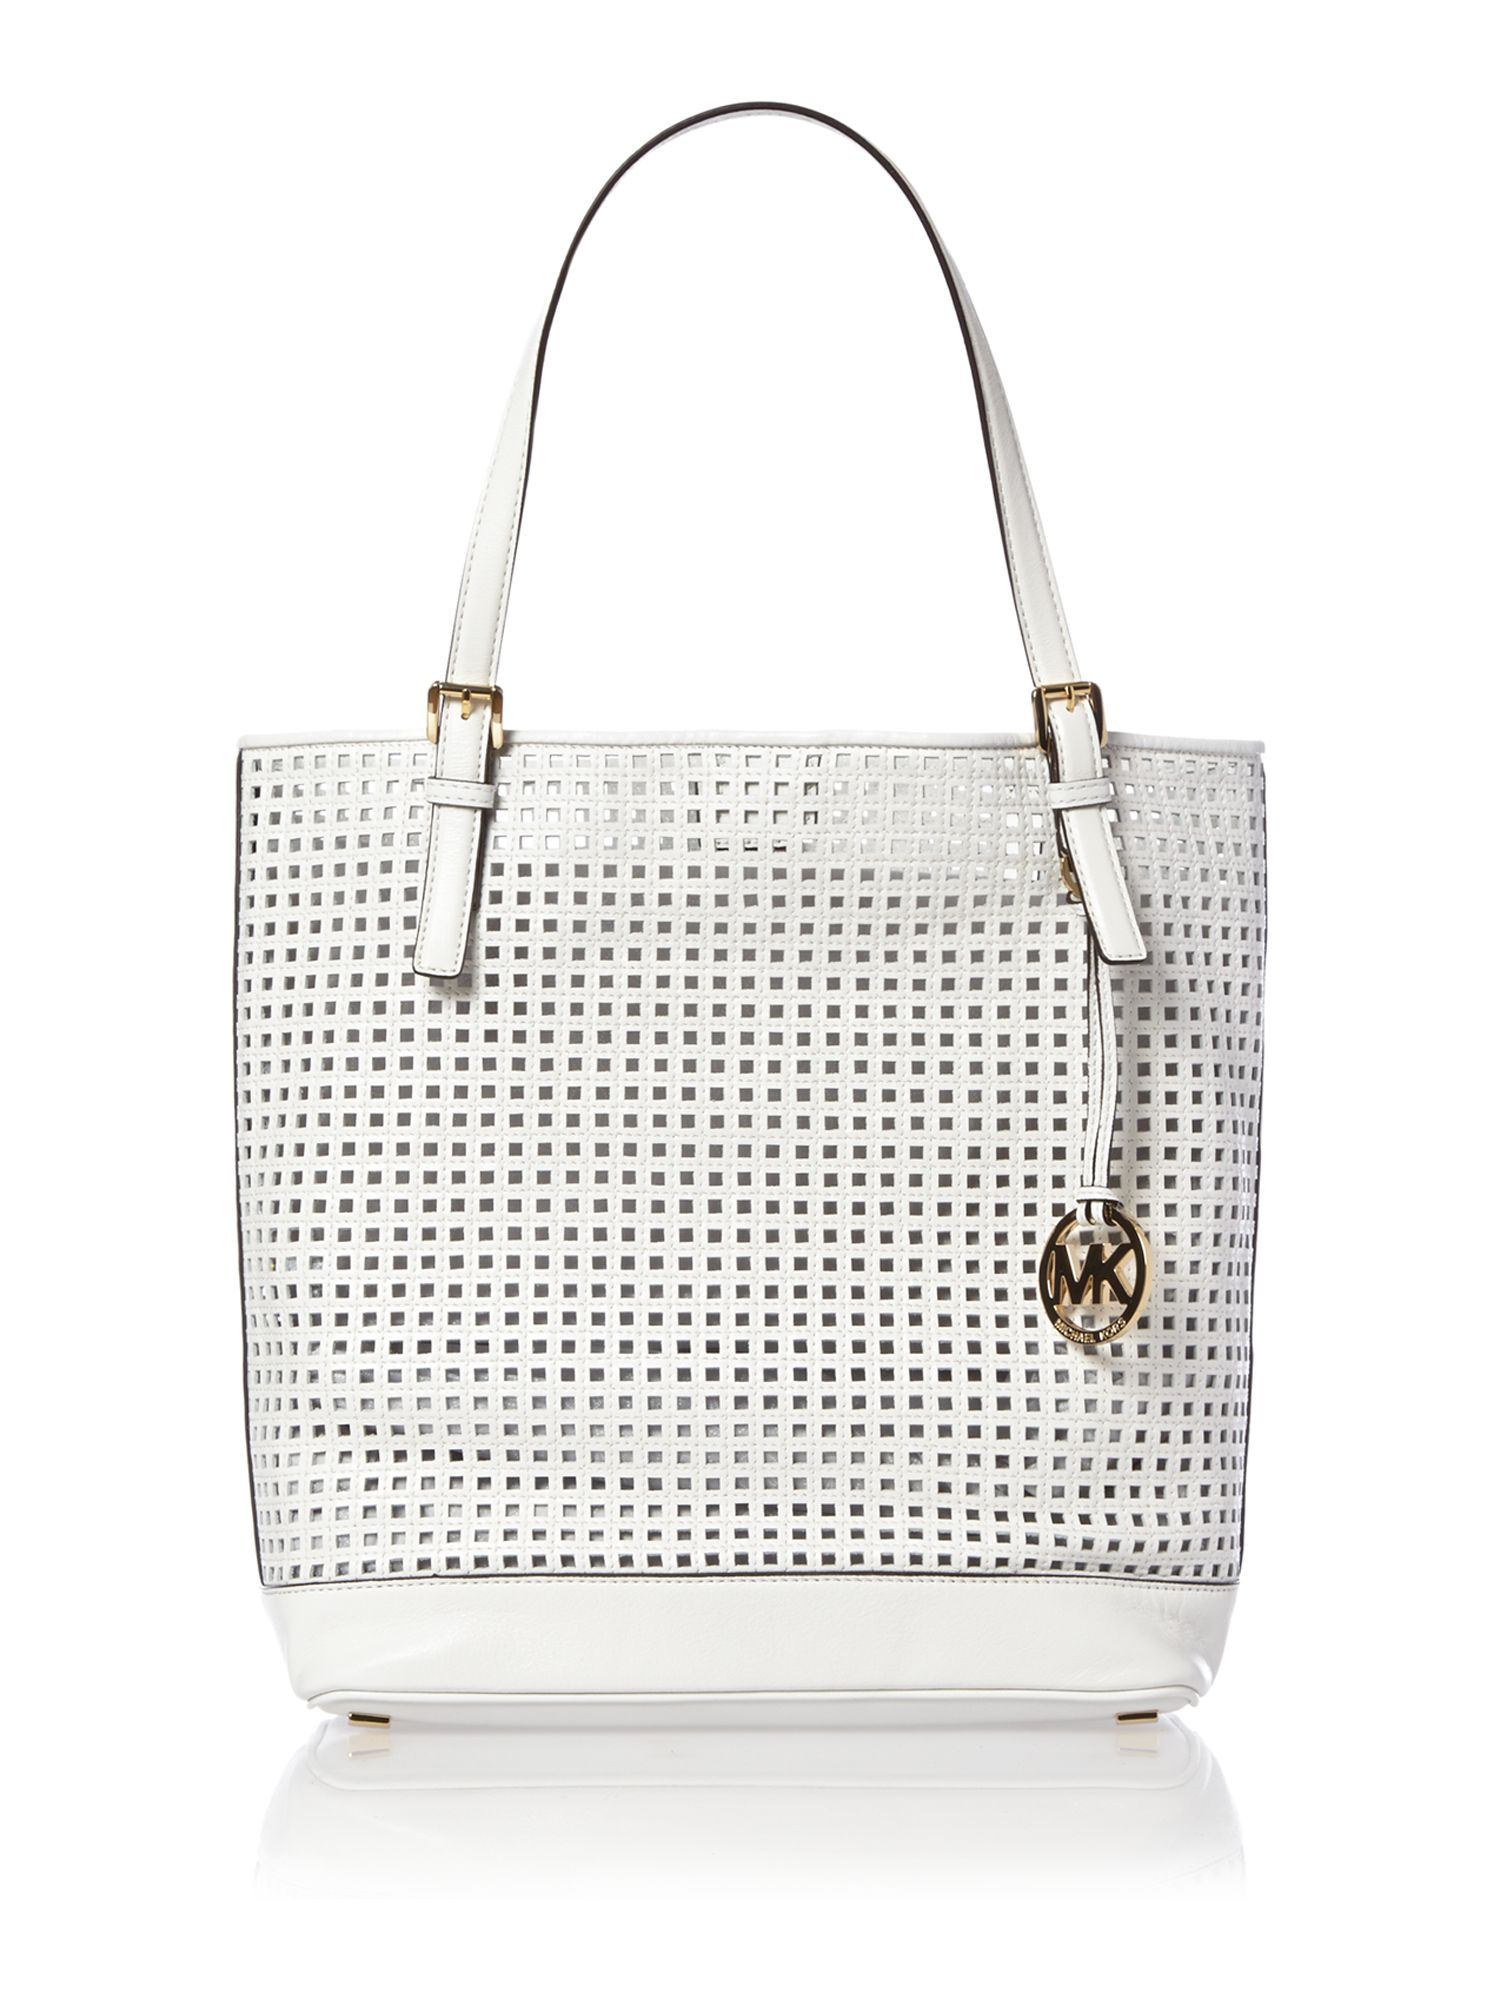 Michael Kors Bridget White Perforated Tote Bag in White | Lyst